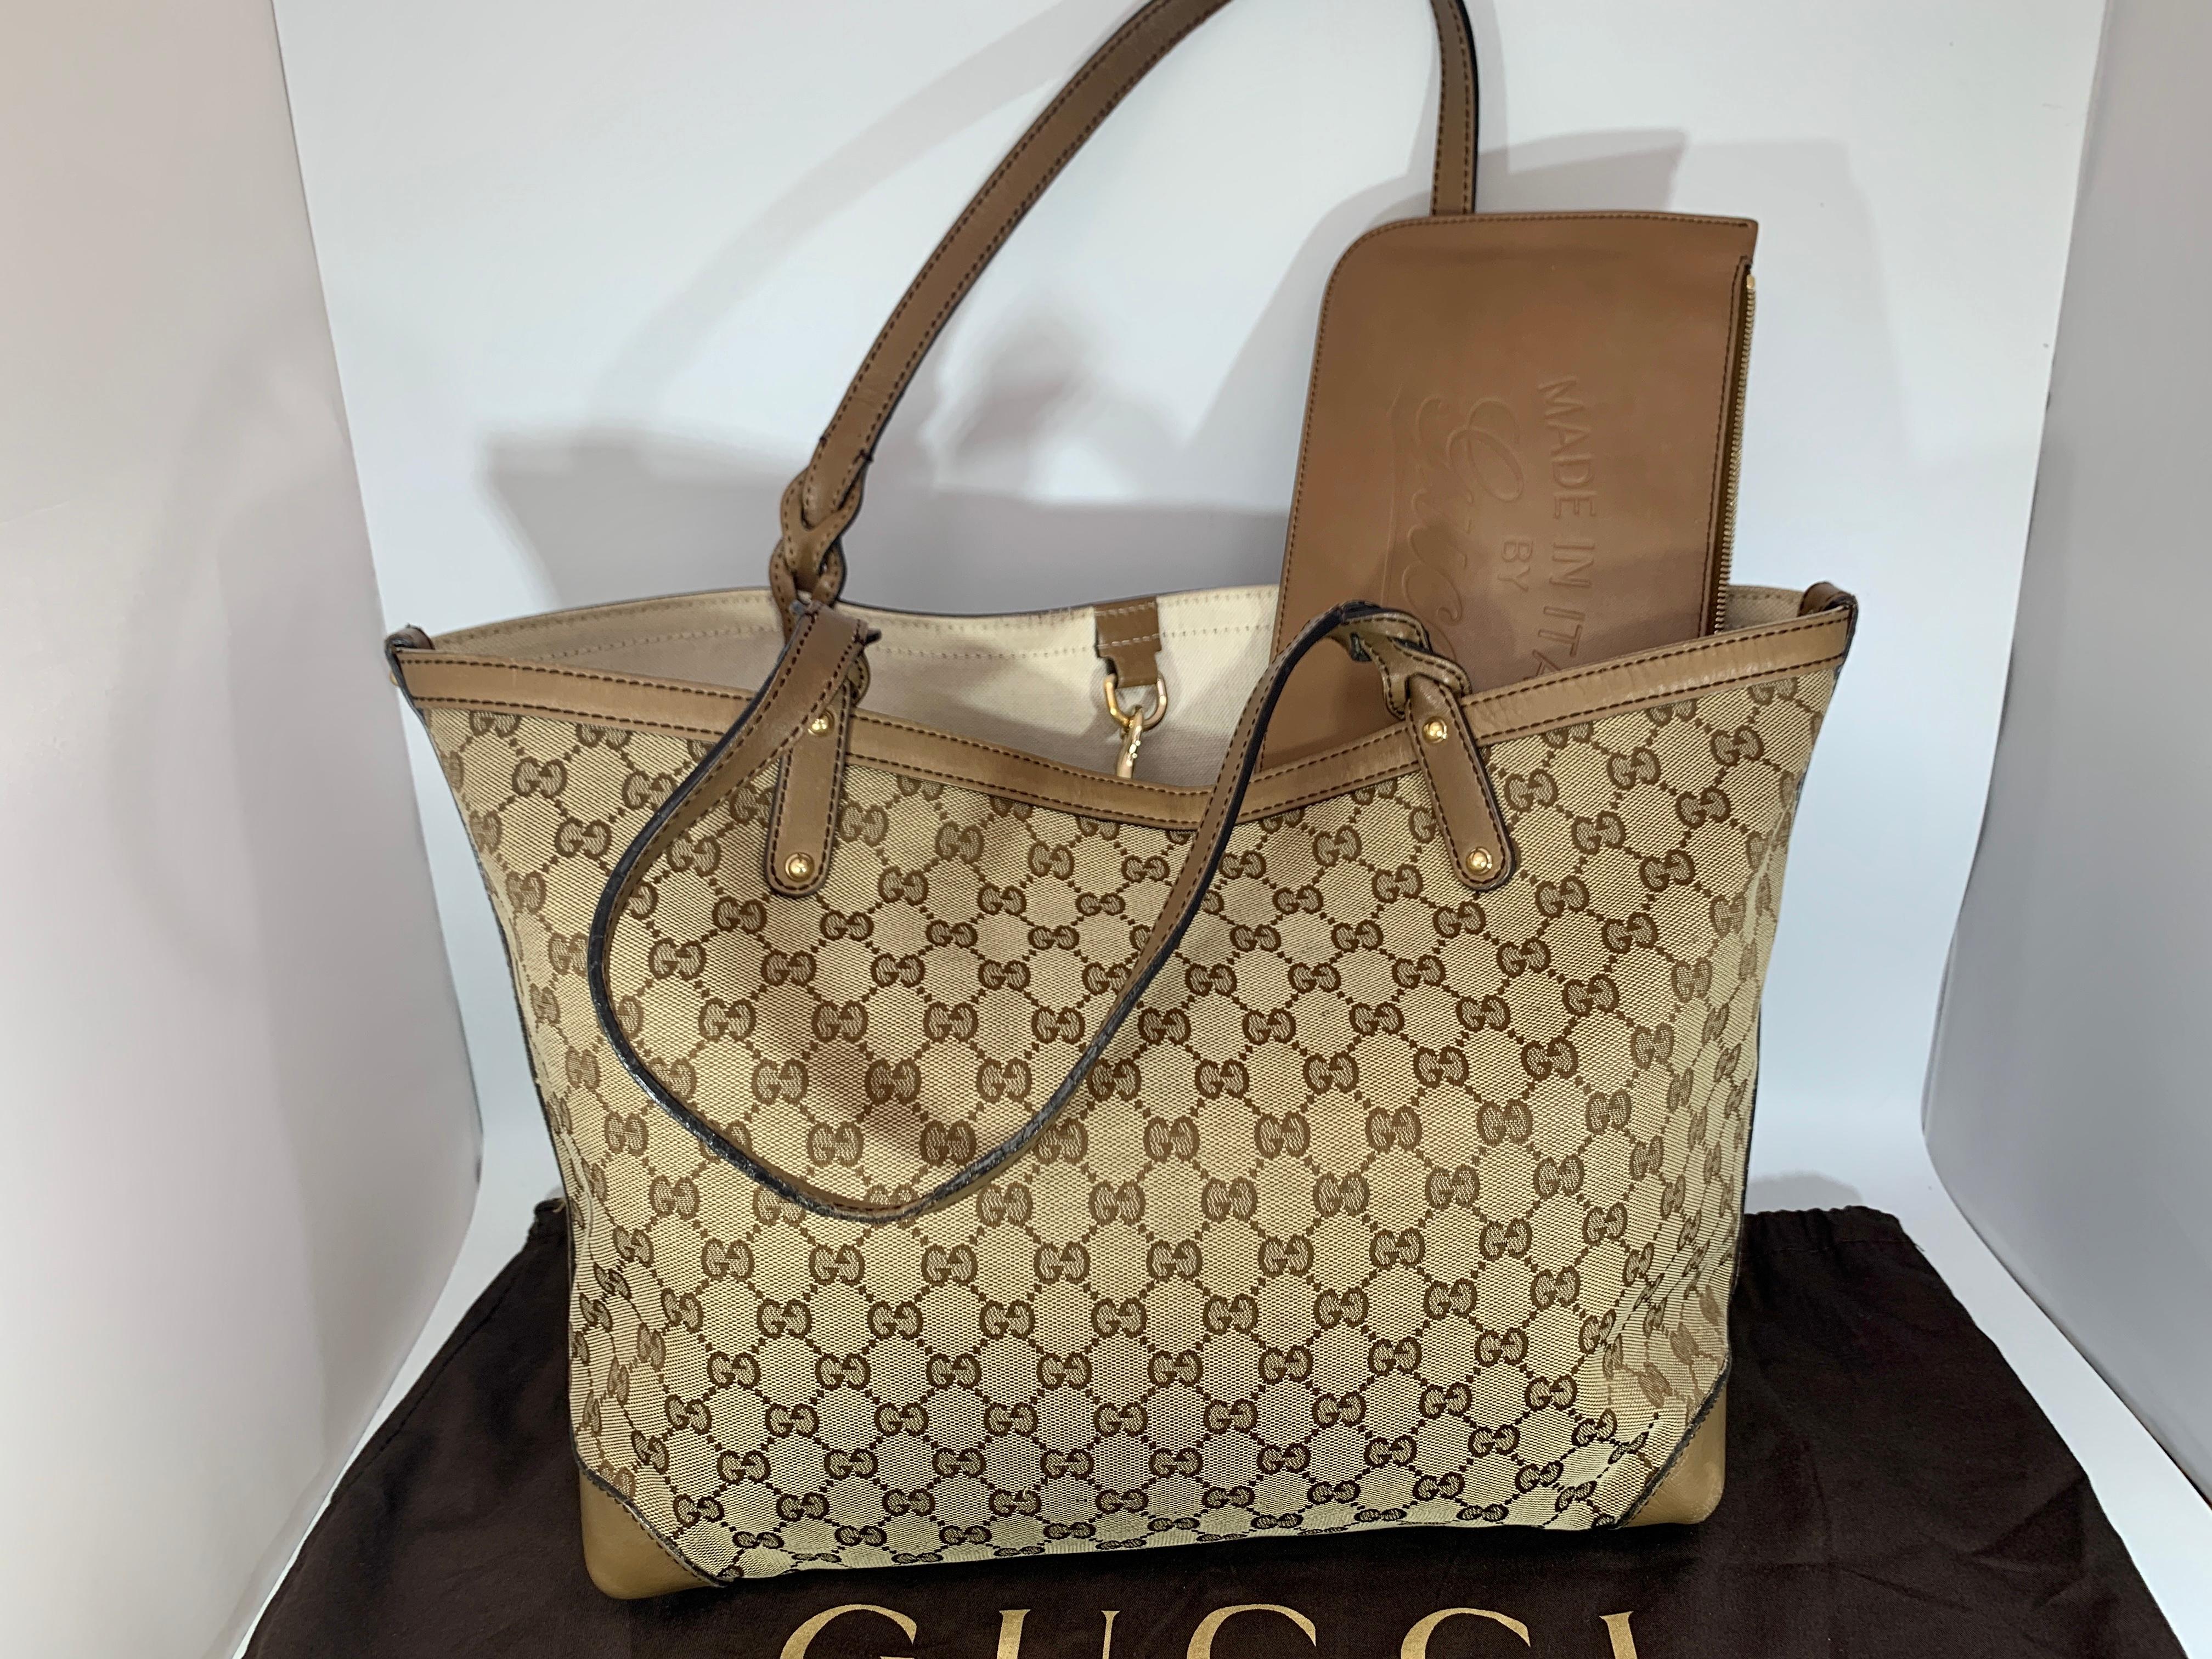 This is an authentic GUCCI Monogram Large Original Tote Tan . This chic tote is crafted of traditional brown on beige Gucci GG monogram canvas. The bag features light caramel leather details including strap top handles and corner reinforcements. The